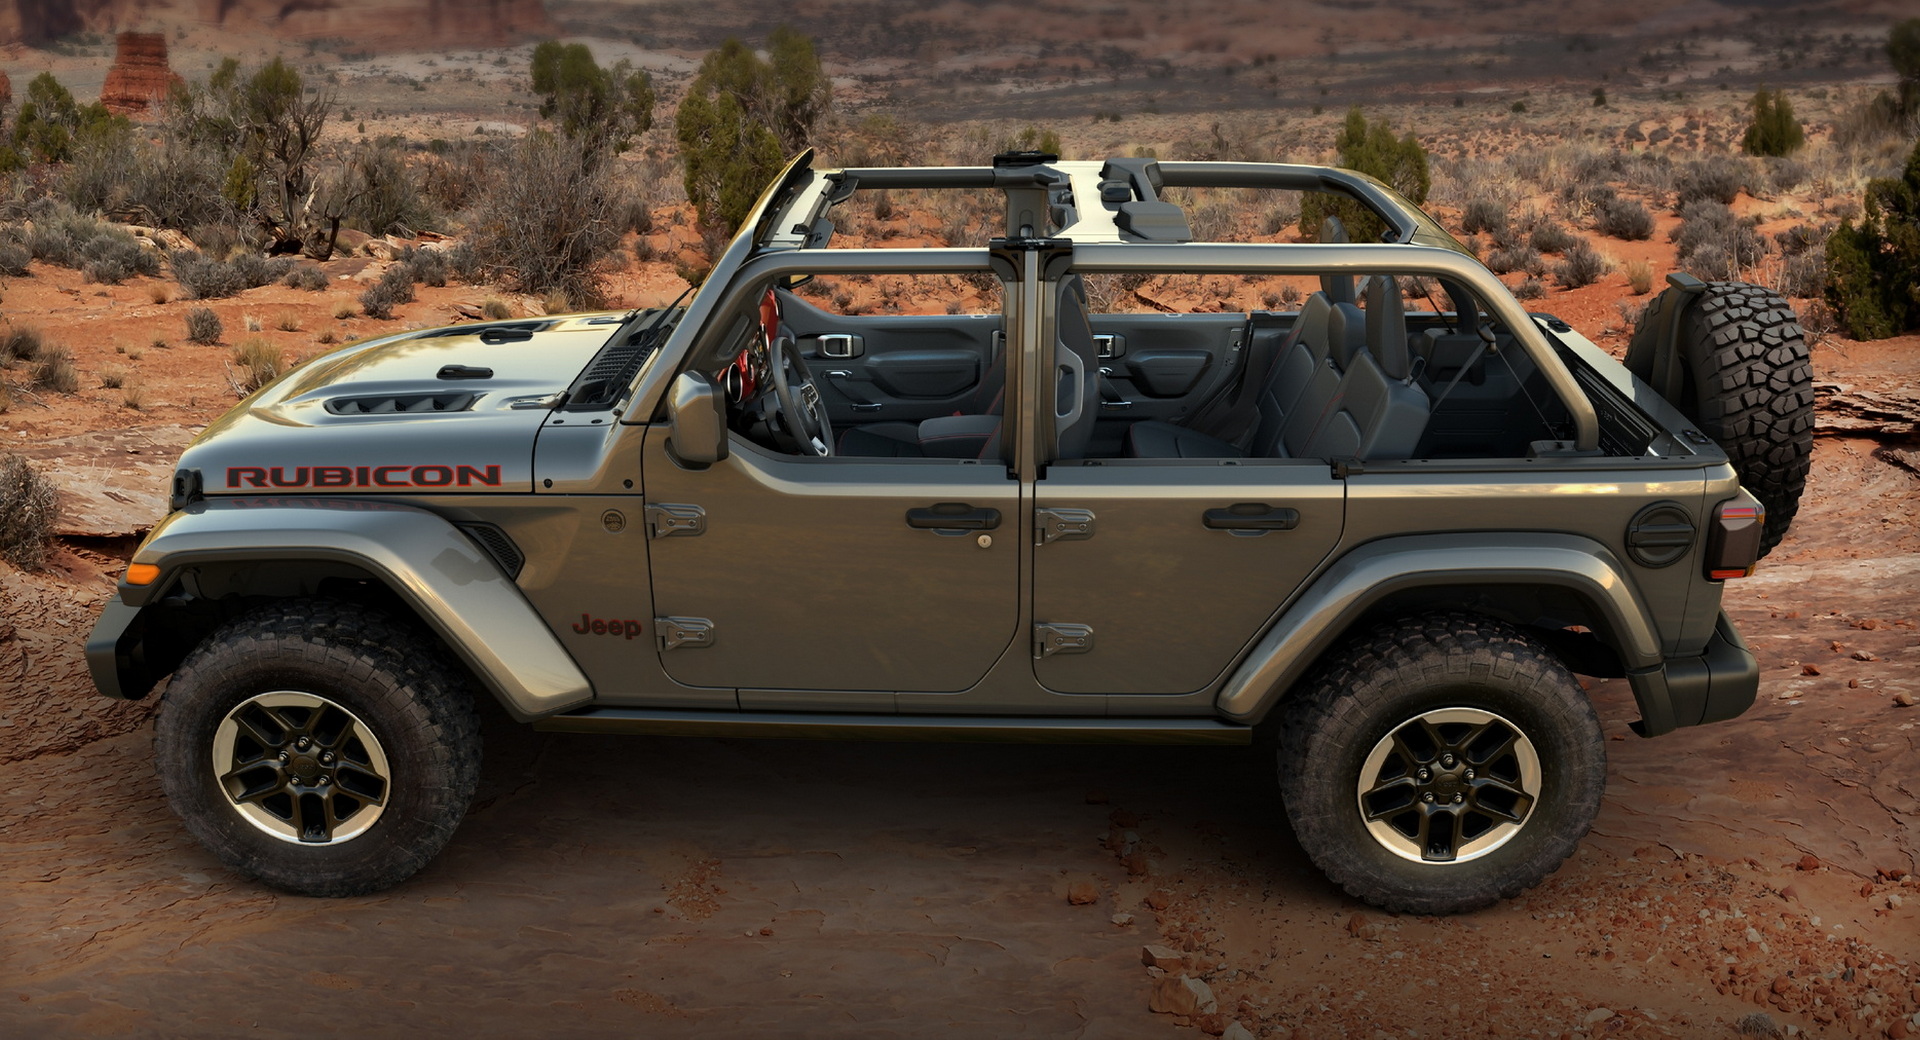 Officially Introduces $2,350-$4,395 Option The Wrangler | Carscoops